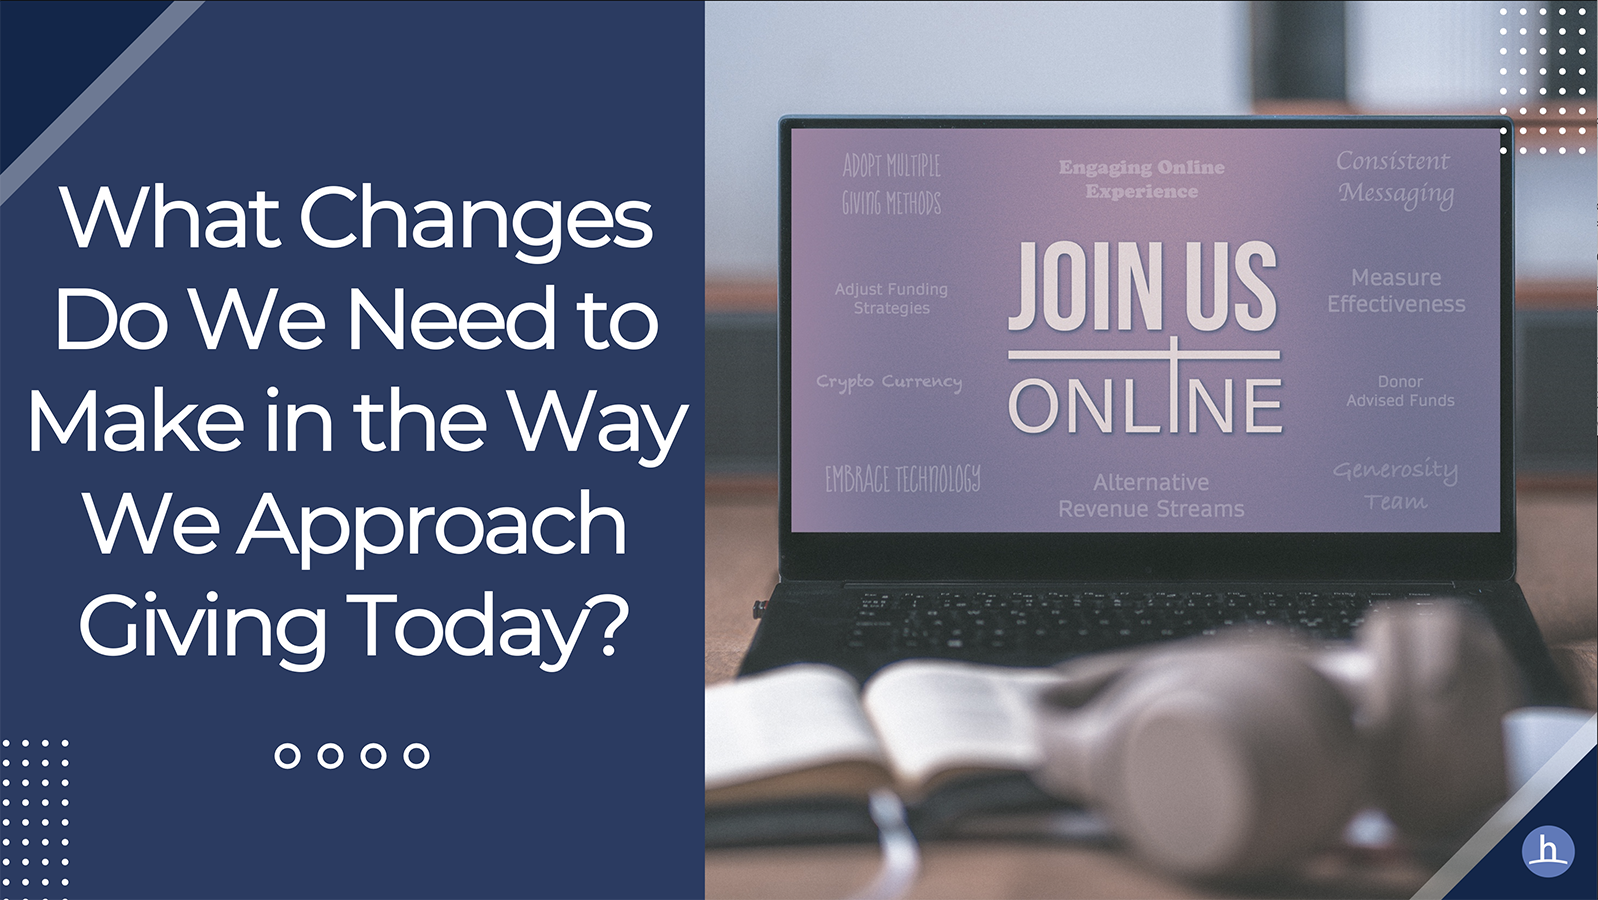 What changes do we need to make in the way we approach giving today